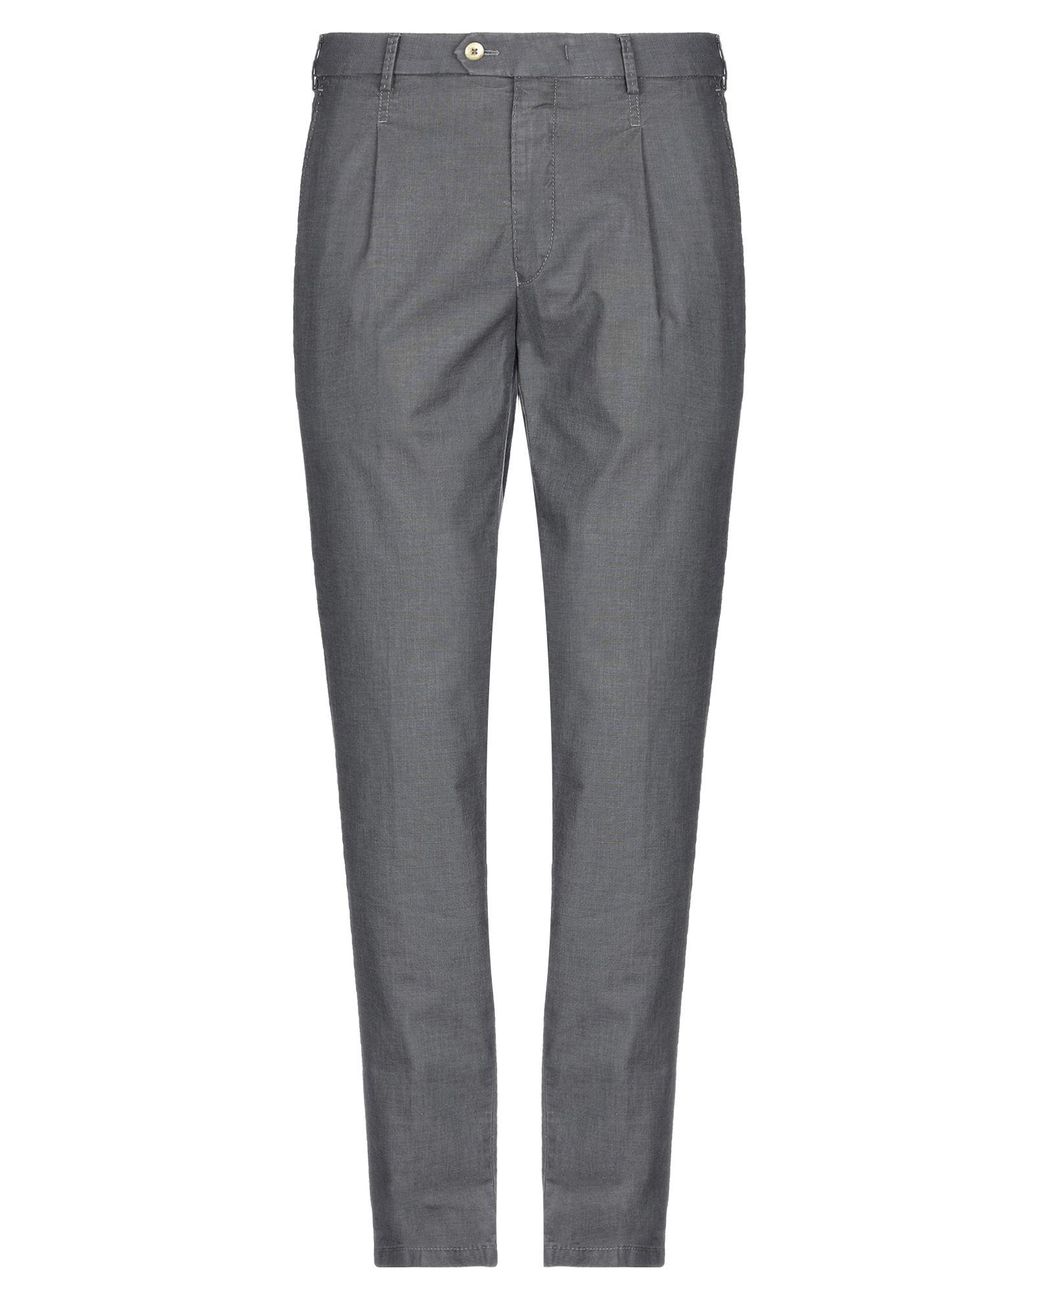 MMX Cotton Casual Pants in Lead (Gray) for Men - Save 37% - Lyst